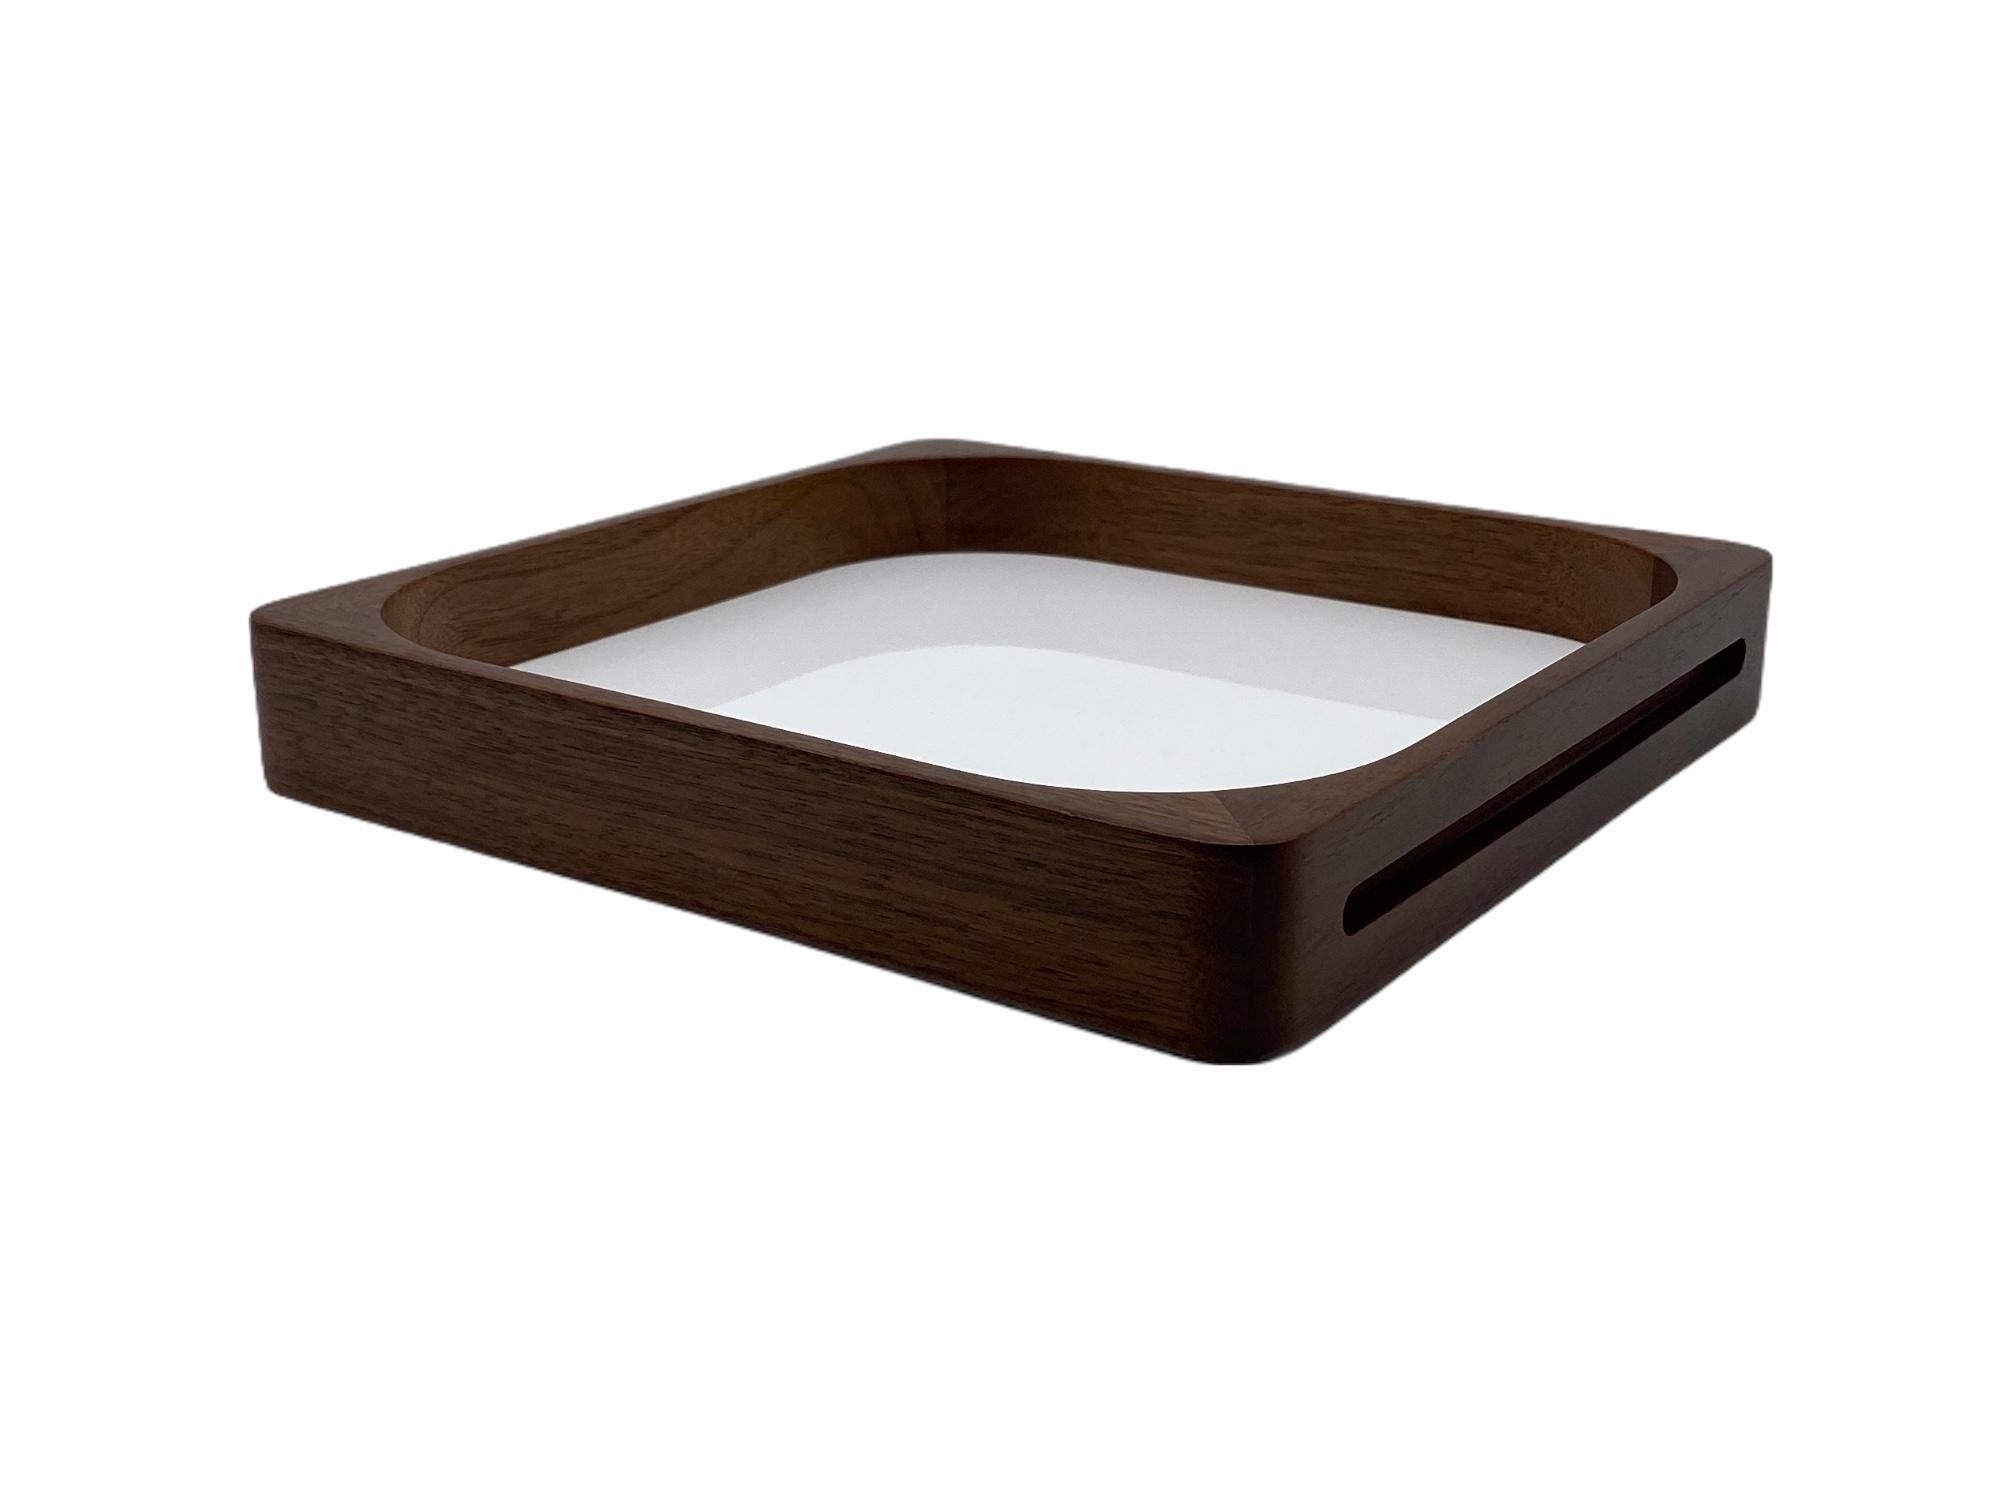 This classic, yet modern, craftsmanship based tray is made out of Walnut wood and acrylic and was designed by GS in 2004. It can be used by clients as a cocktail tray as well as a very modern and practical serving tray, making it the perfect gift.